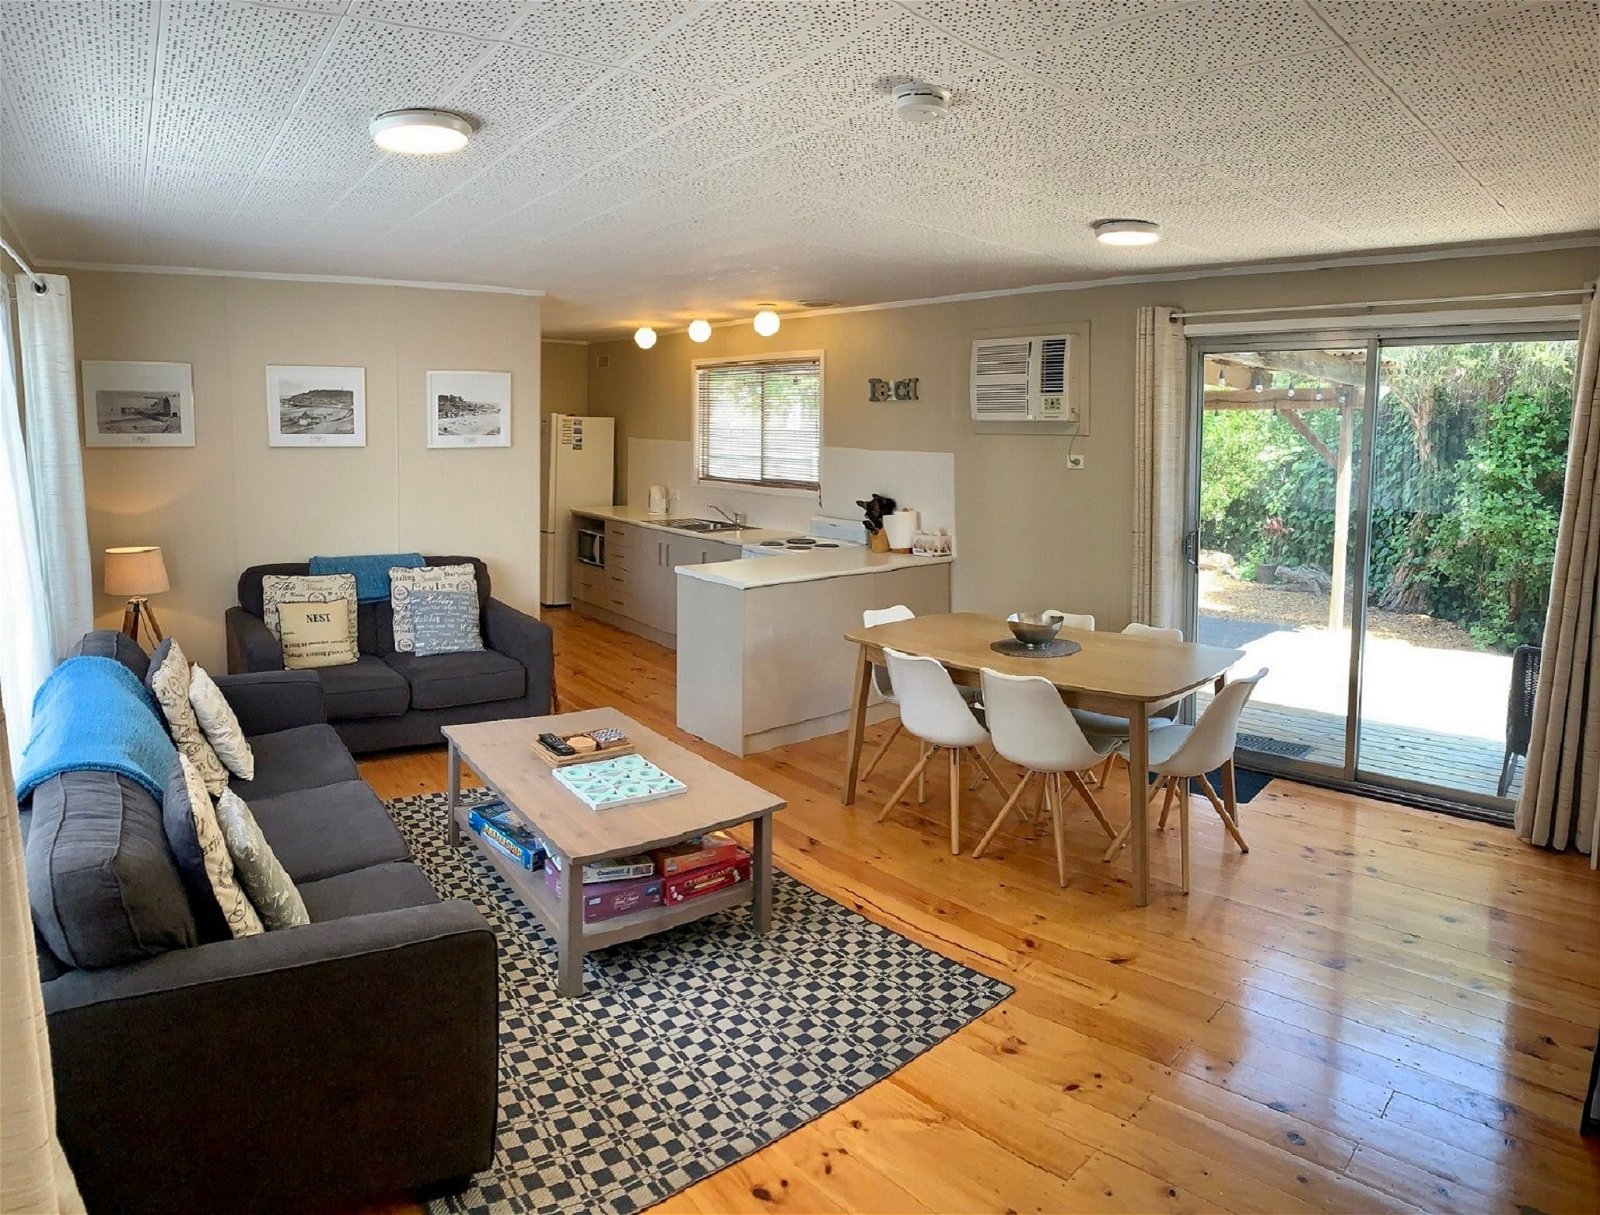  Accommodation Coffs Harbour